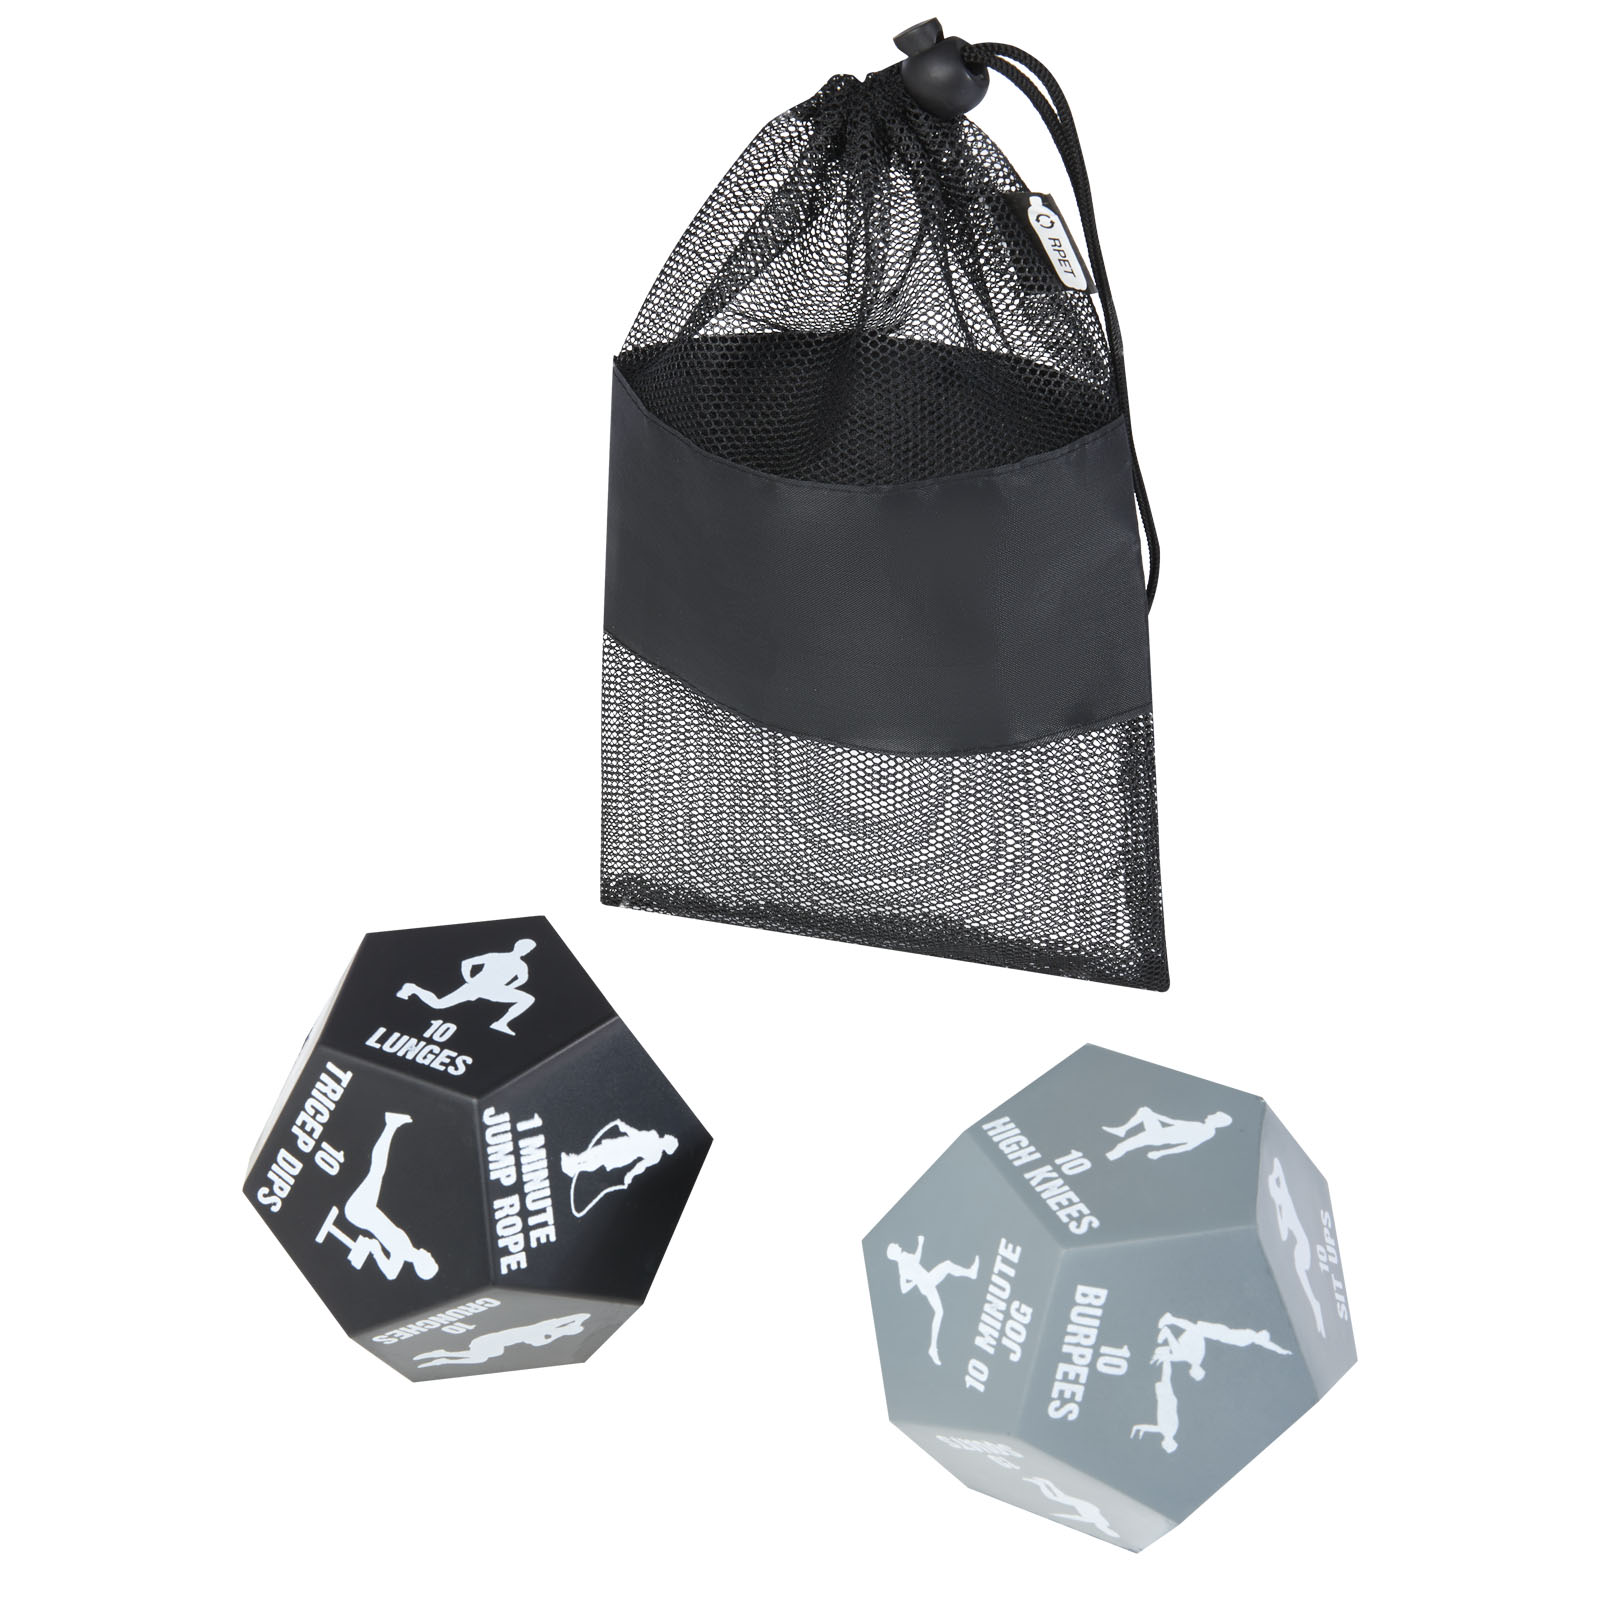 2-Piece Exercise Dice Game Set with Storage Pouch - Cardigan